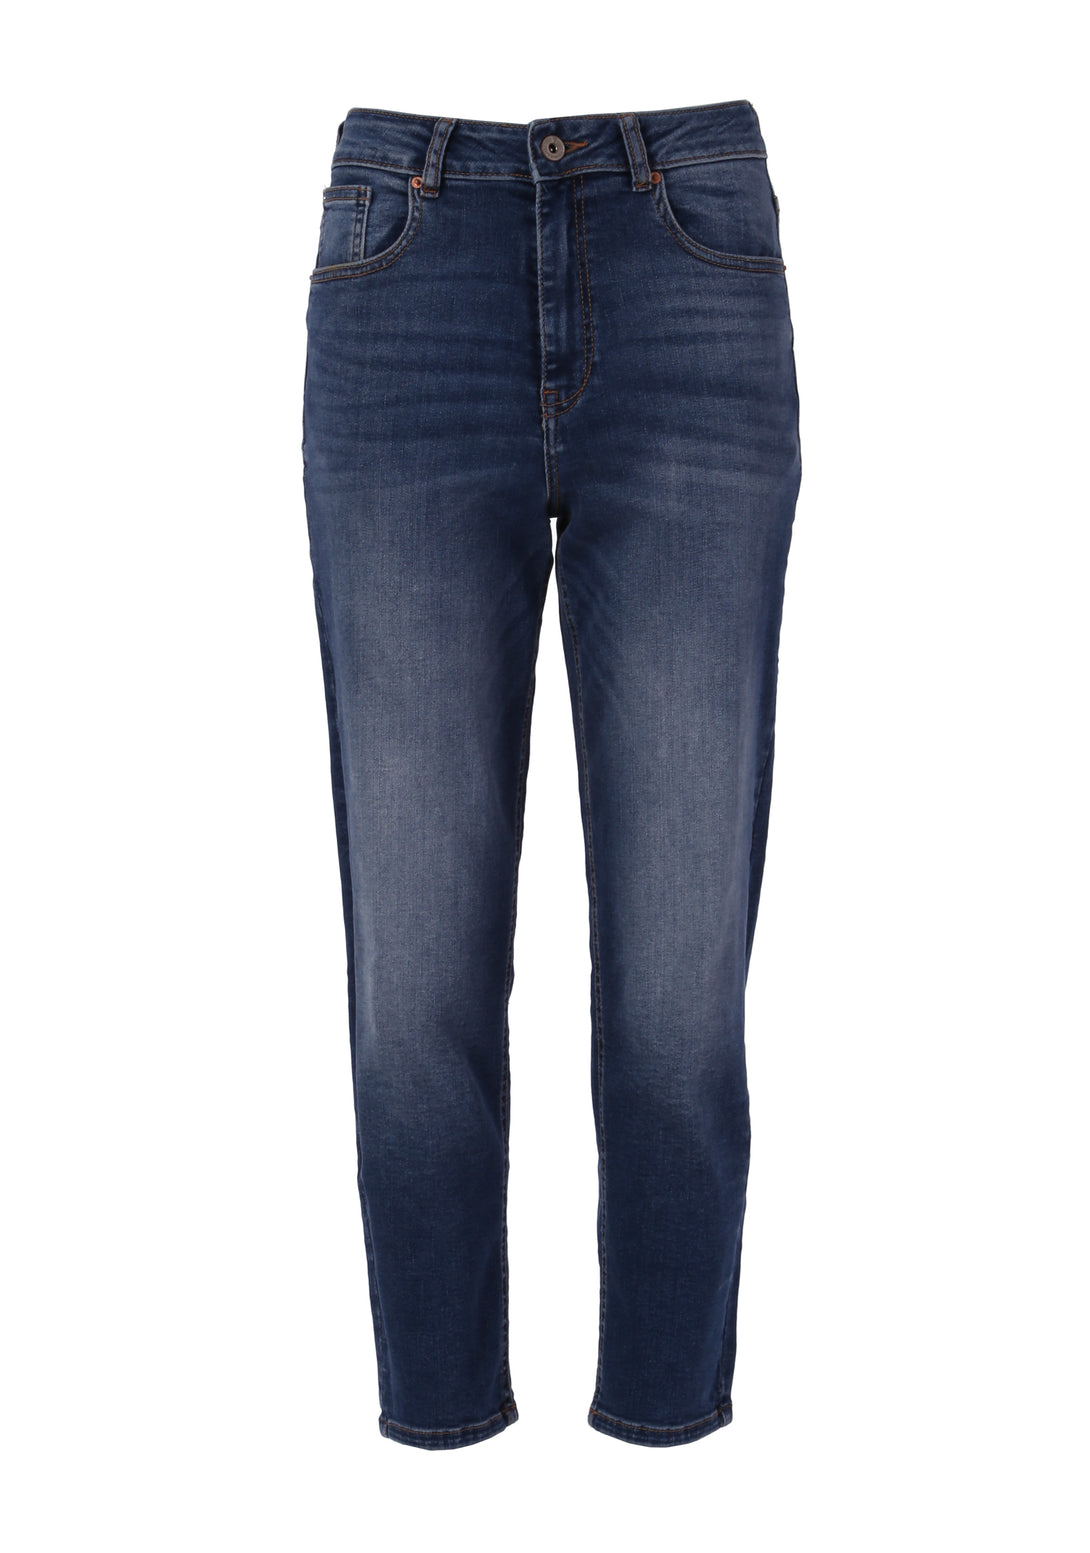 Jeans mom fit cropped made in denim with middle stone wash Fracomina FP24SVD005D40402-349-1